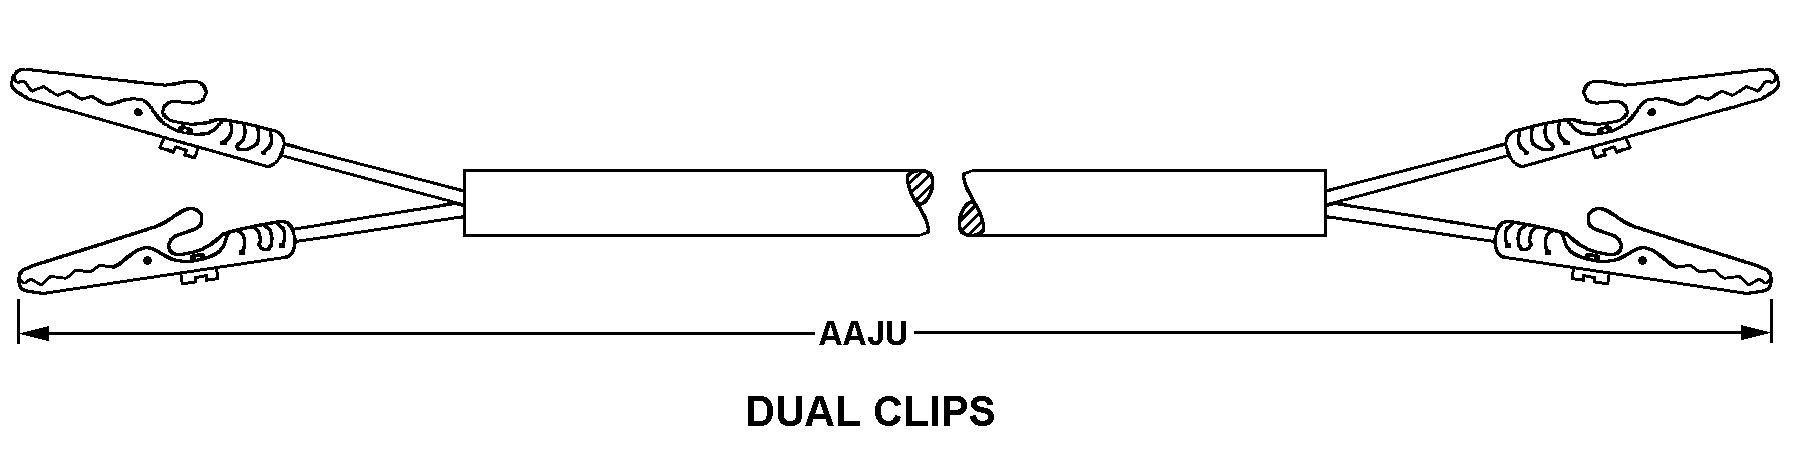 DUAL CLIPS style nsn 6020-01-588-9139